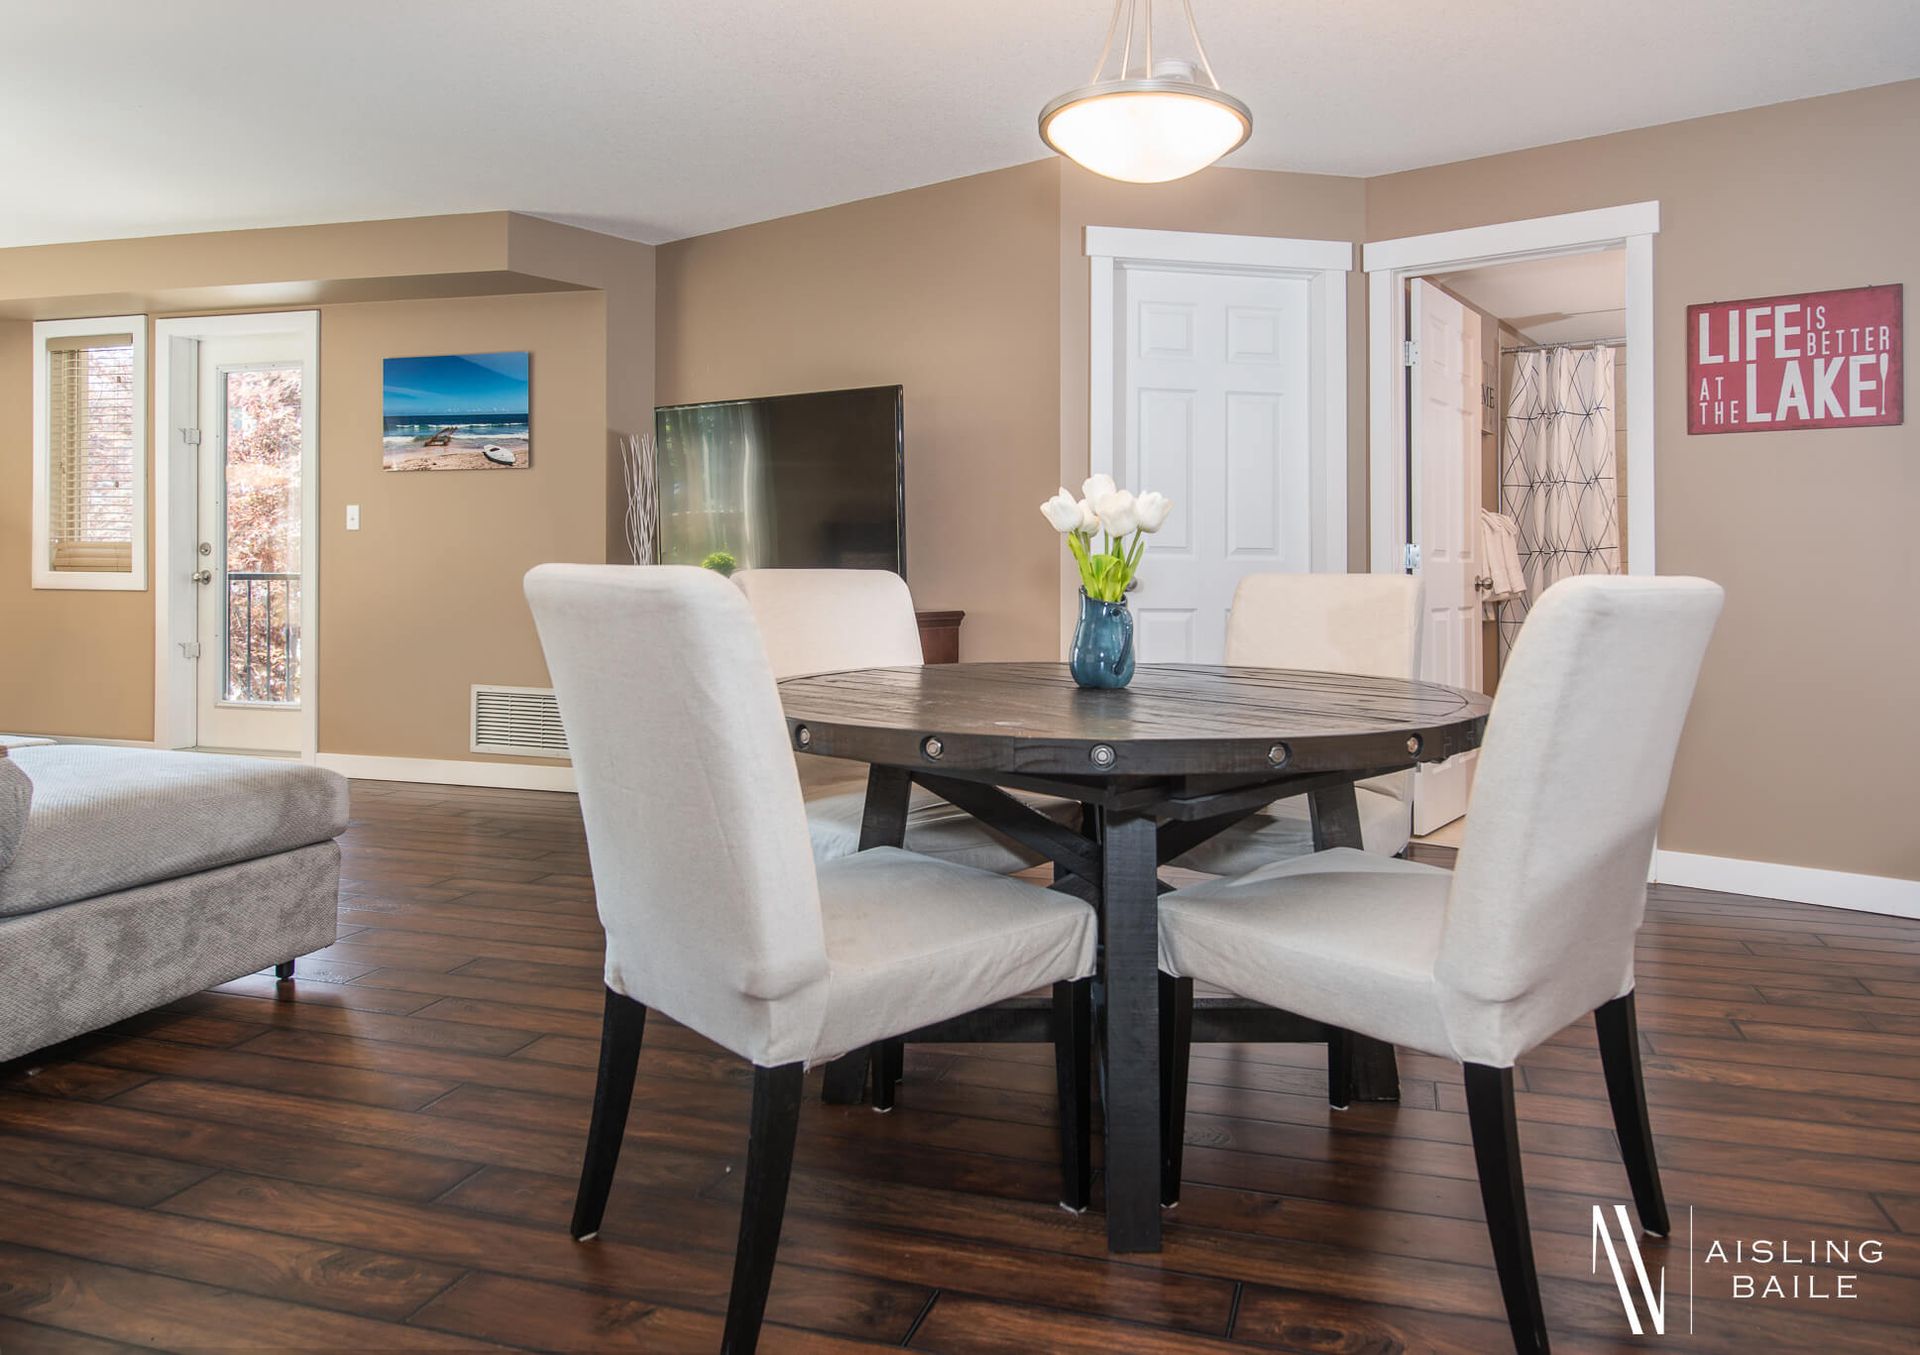 Dining table at the Stylish condo of Lake Windermere Pointe in Invermere, a BC Vacation Rental hosted by Aisling Baile Property Management.